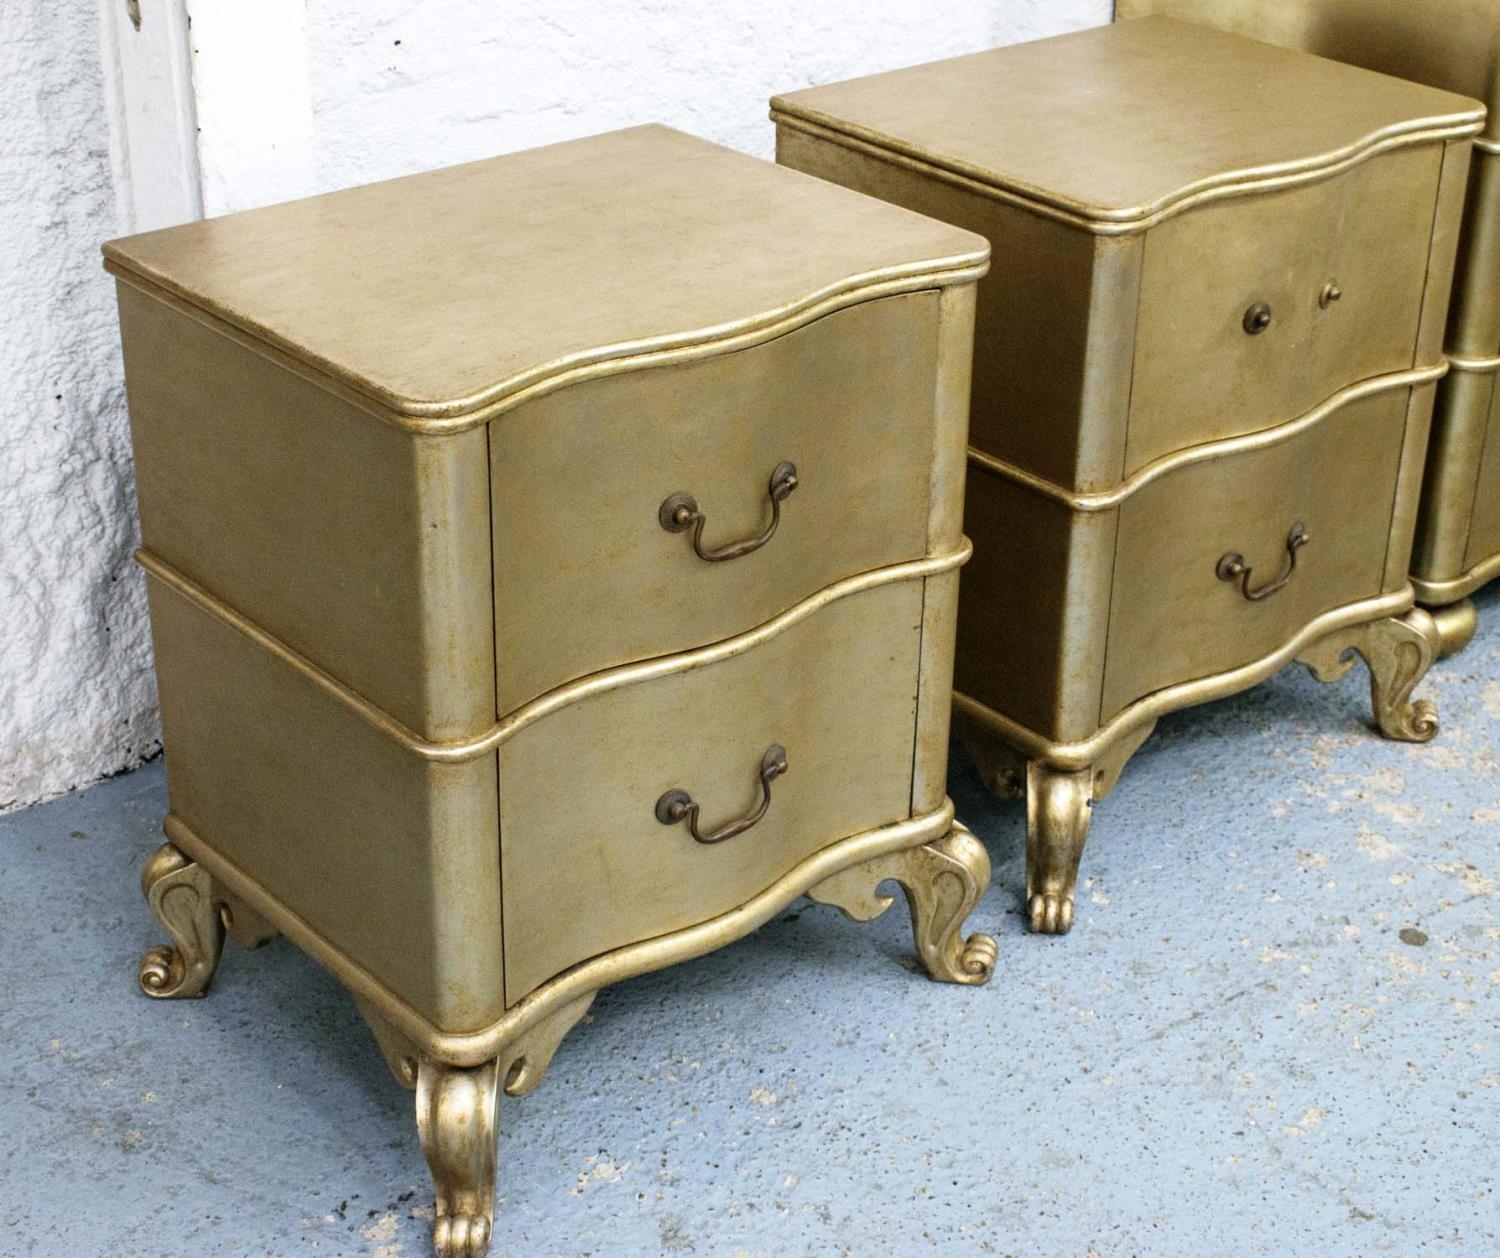 SIDE CHESTS, a pair, 55cm x 44cm x 69cm, contemporary gilt wood, two drawers each. (2) - Image 4 of 24